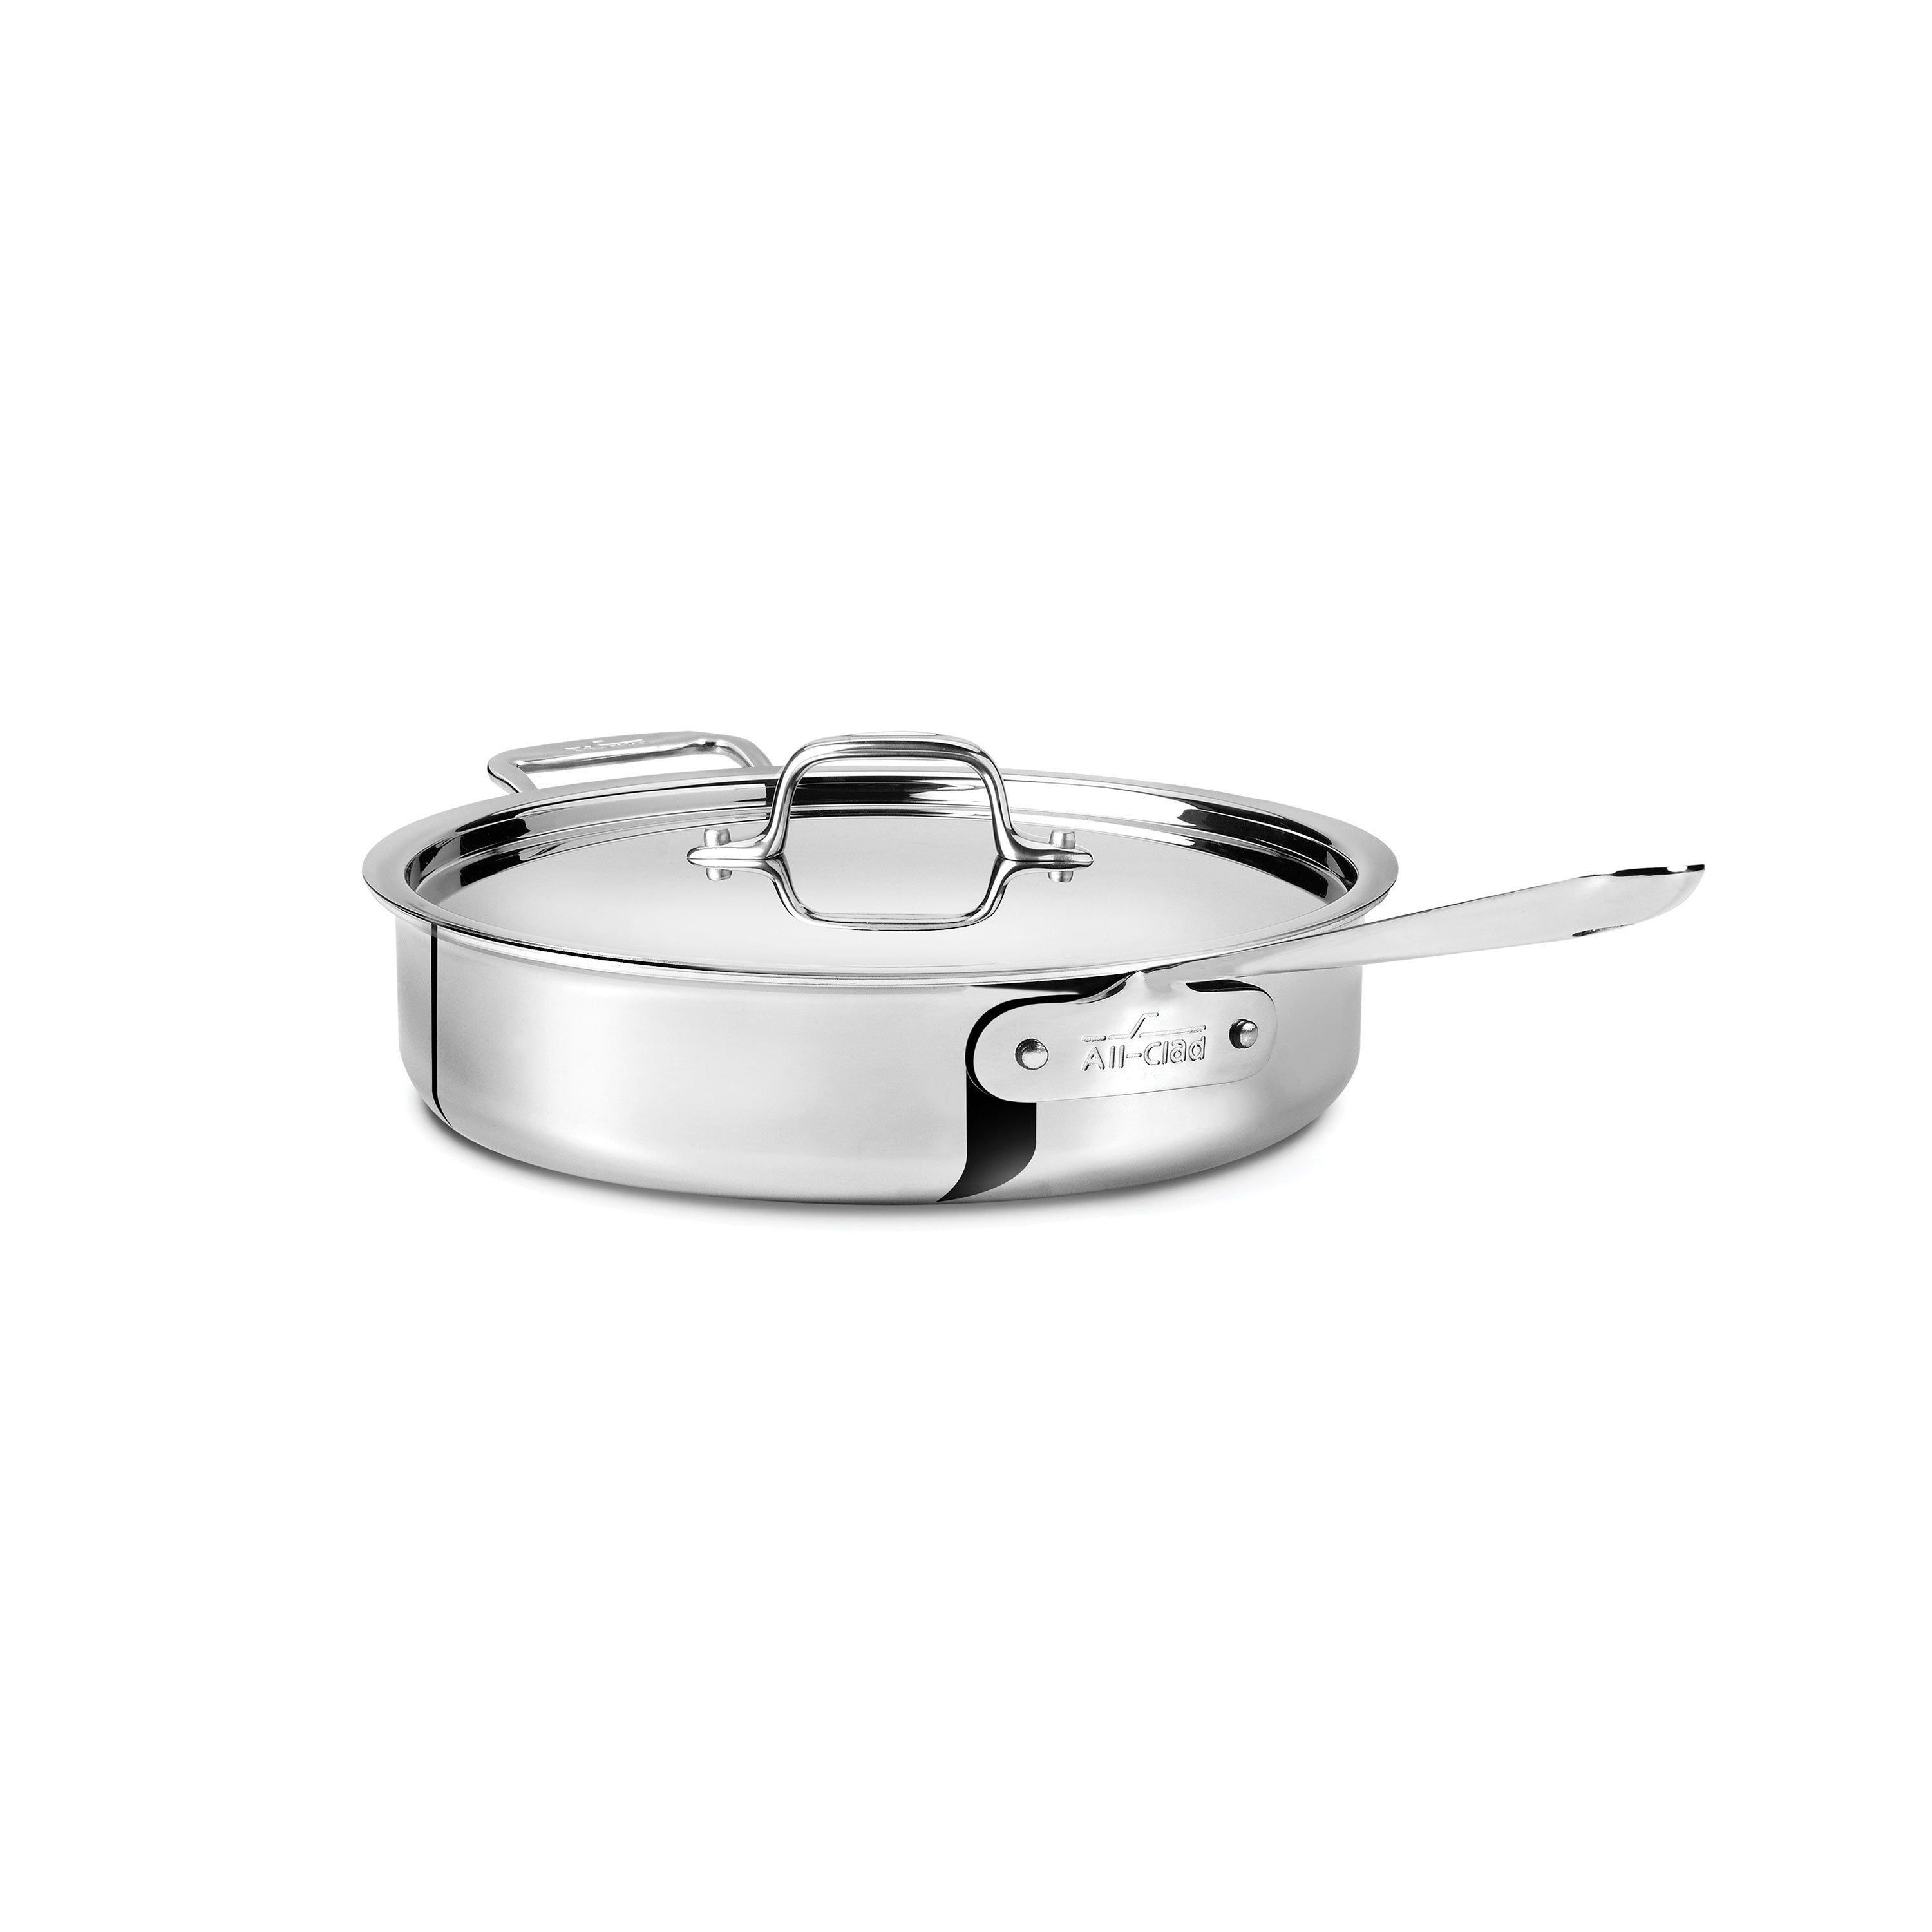 All-Clad Cookware: View Our Extensive Collection of All-Clad products